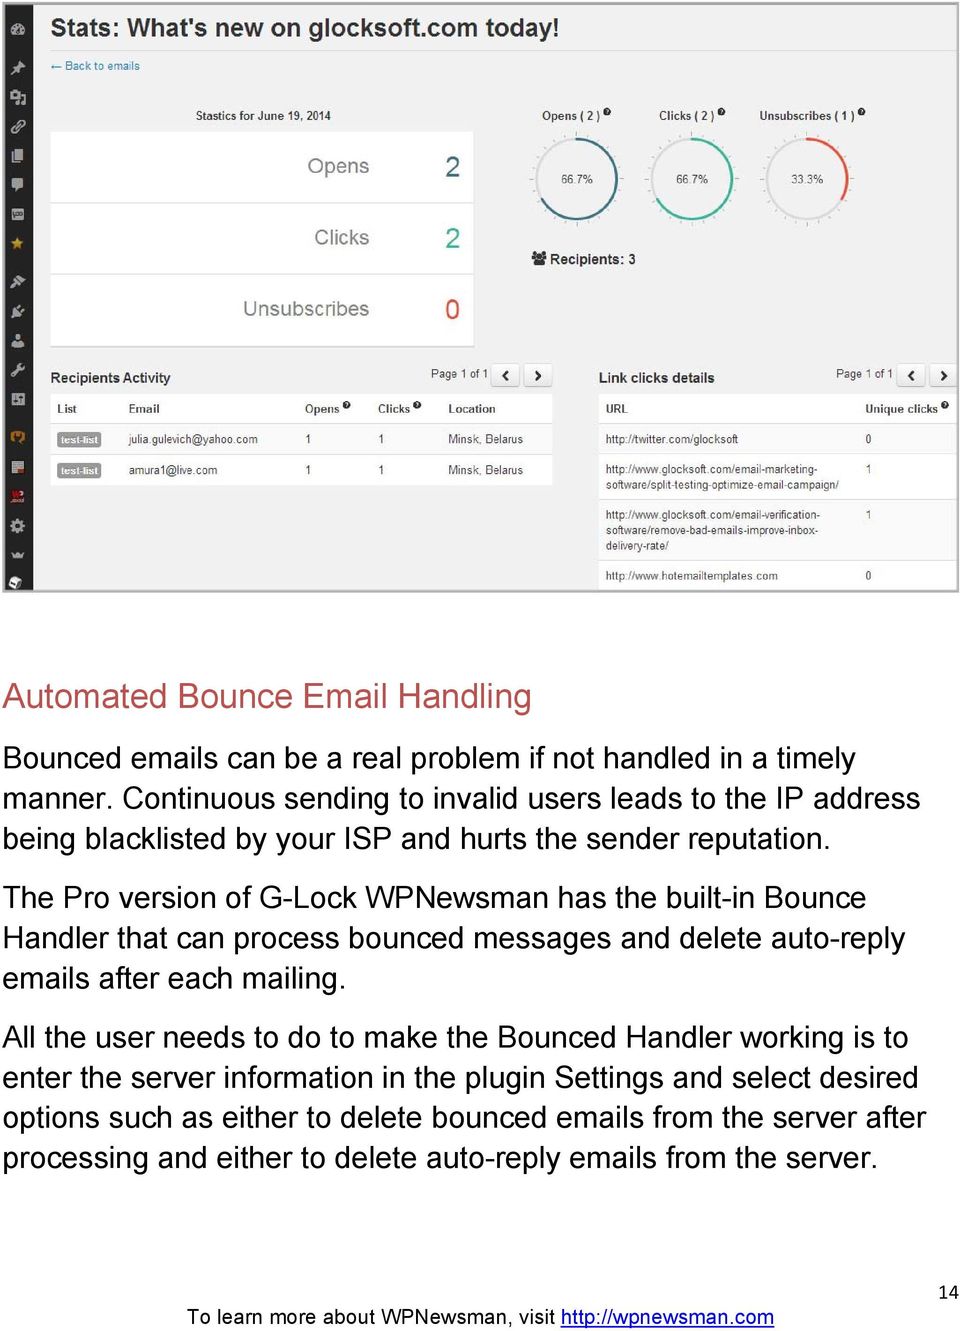 The Pro version of G-Lock WPNewsman has the built-in Bounce Handler that can process bounced messages and delete auto-reply emails after each mailing.